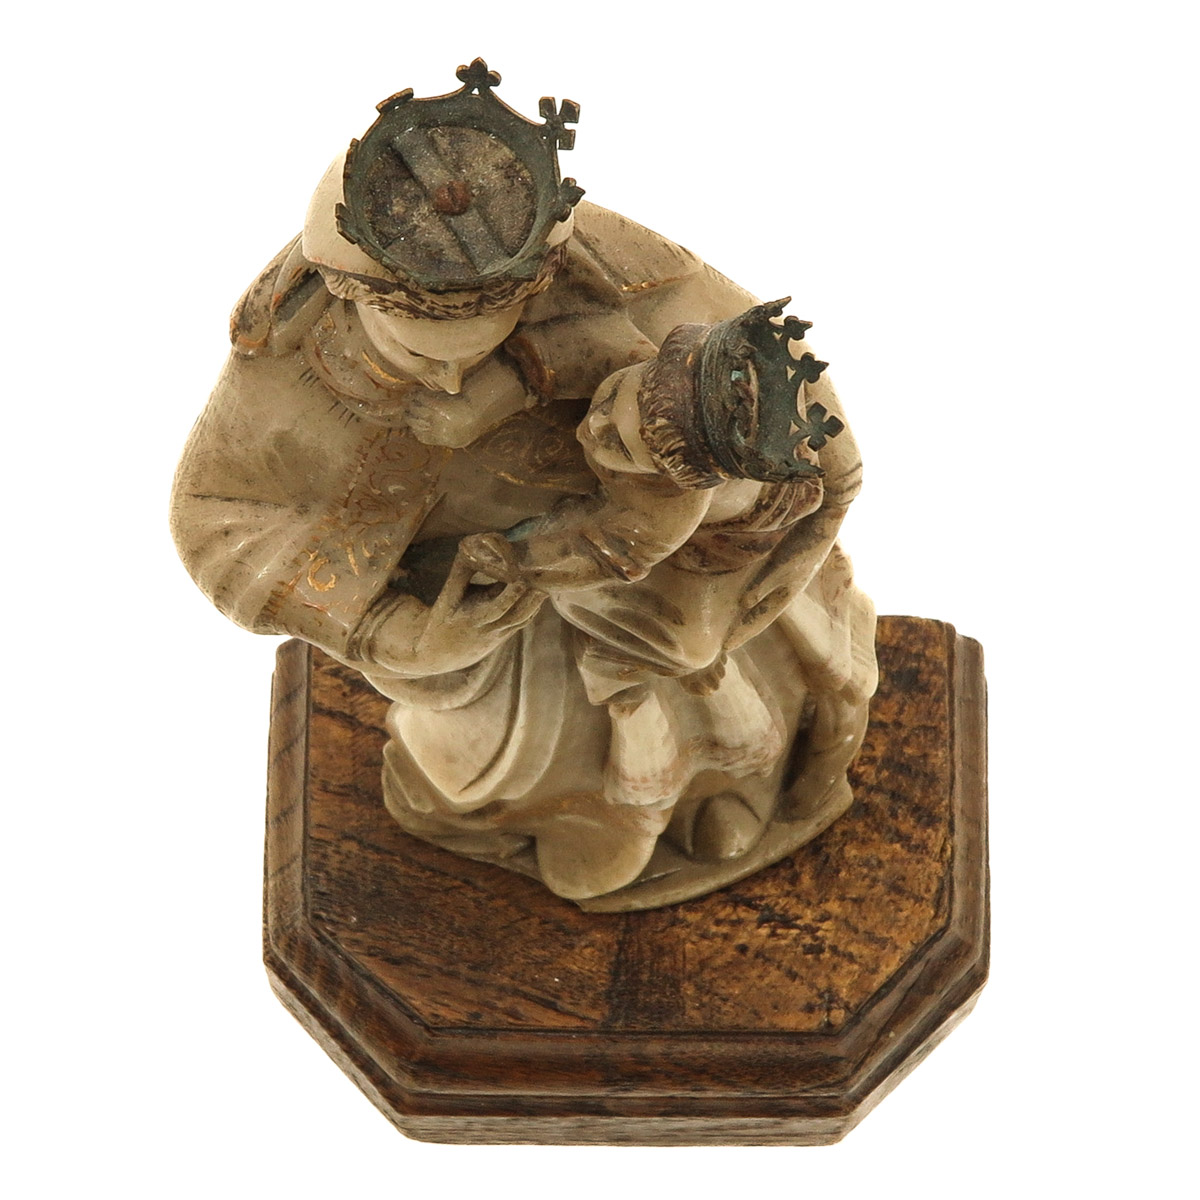 A 17th Century Sculpture of Madonna with Child - Image 5 of 8